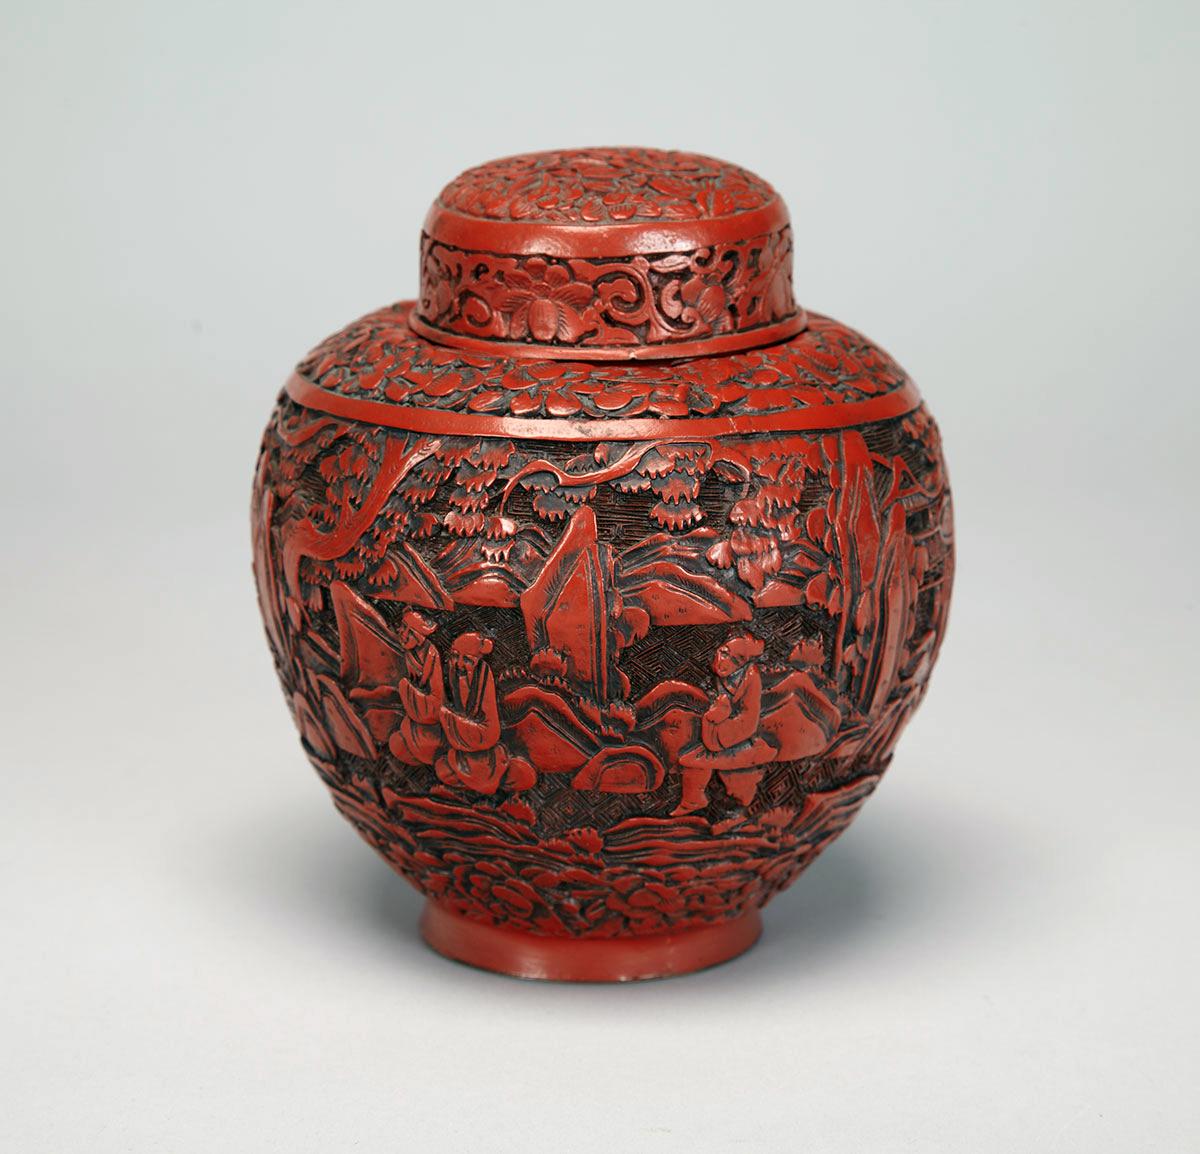 Cinnabar Lacquer Ginger Jar and Cover, Late Qing Dynasty